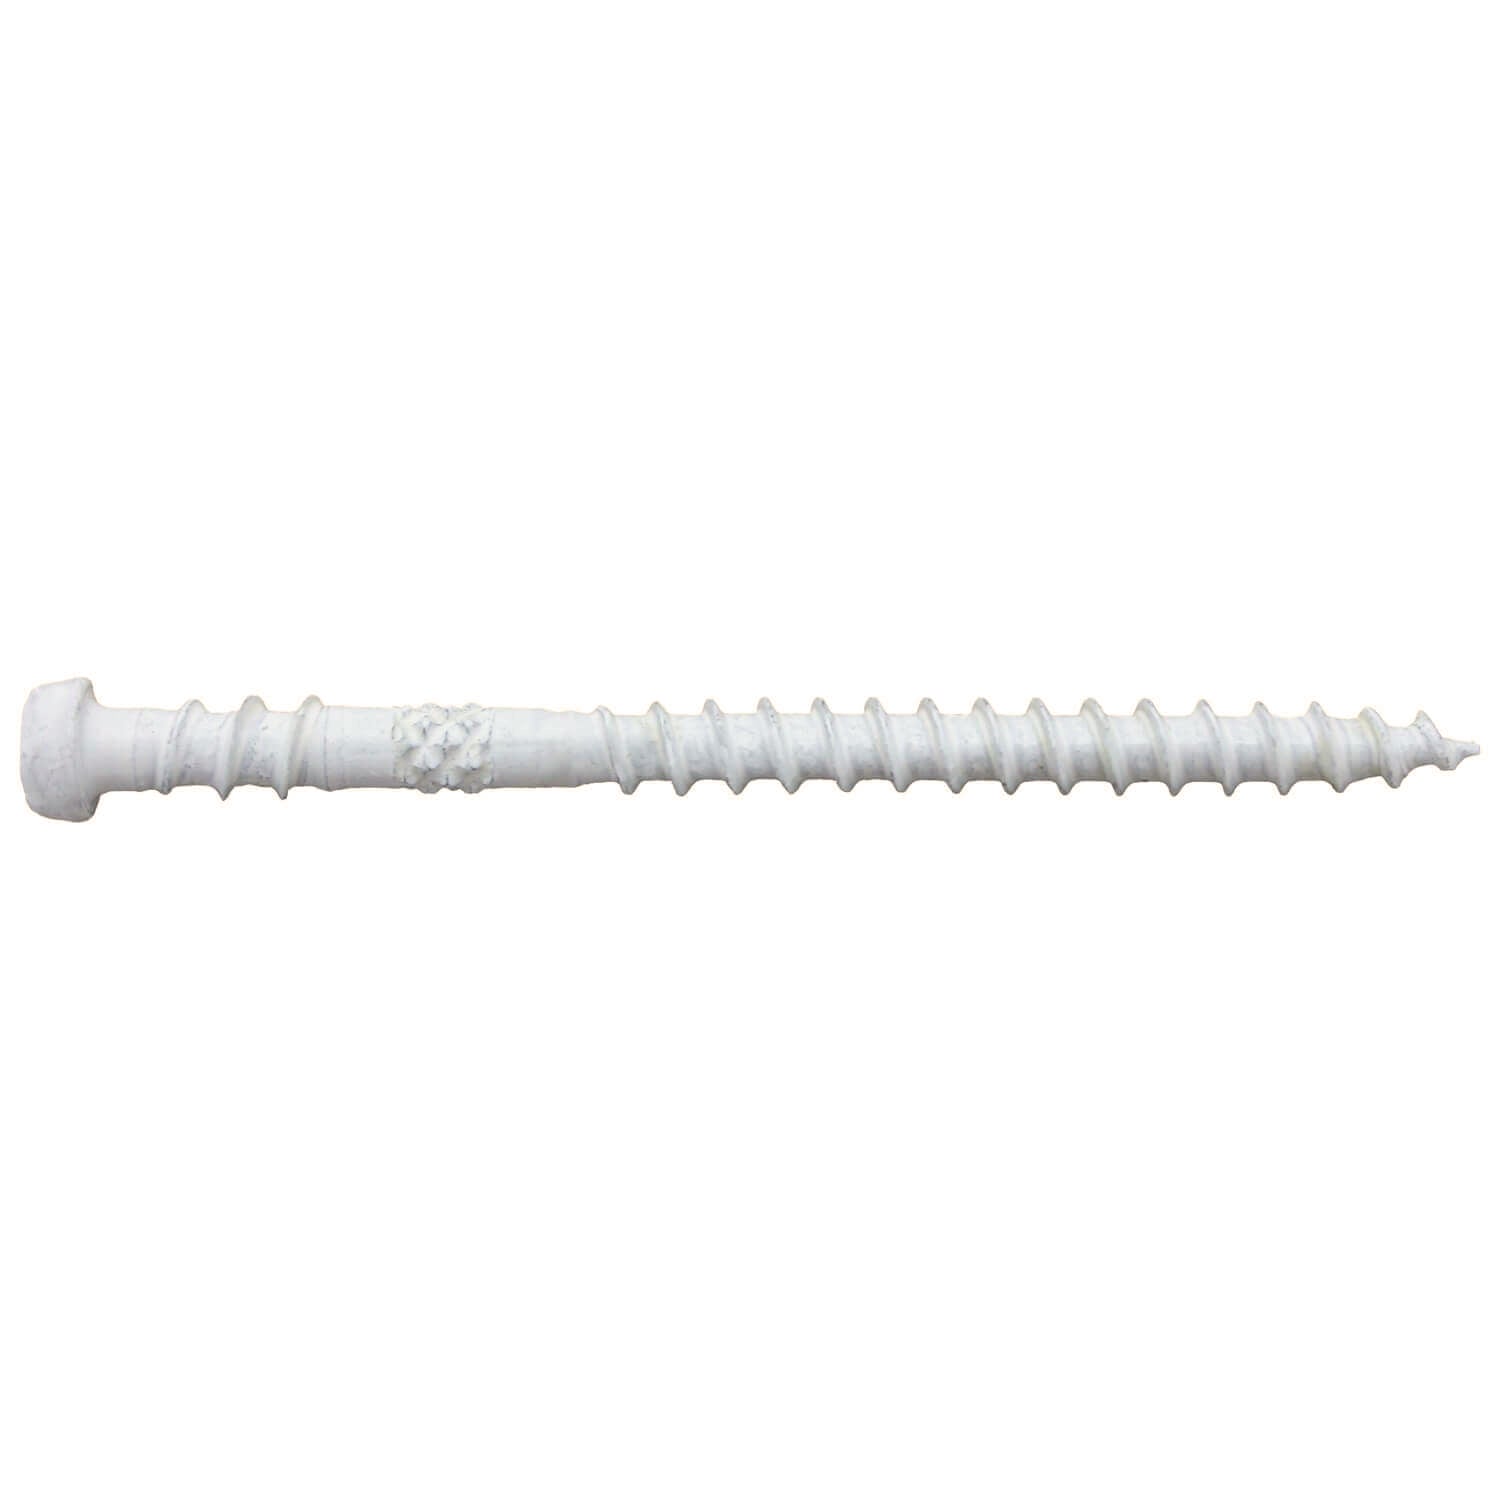 Jake Sales #10 x 2-3/4 WHITE Colored Composite Decking Wood Screw wit –